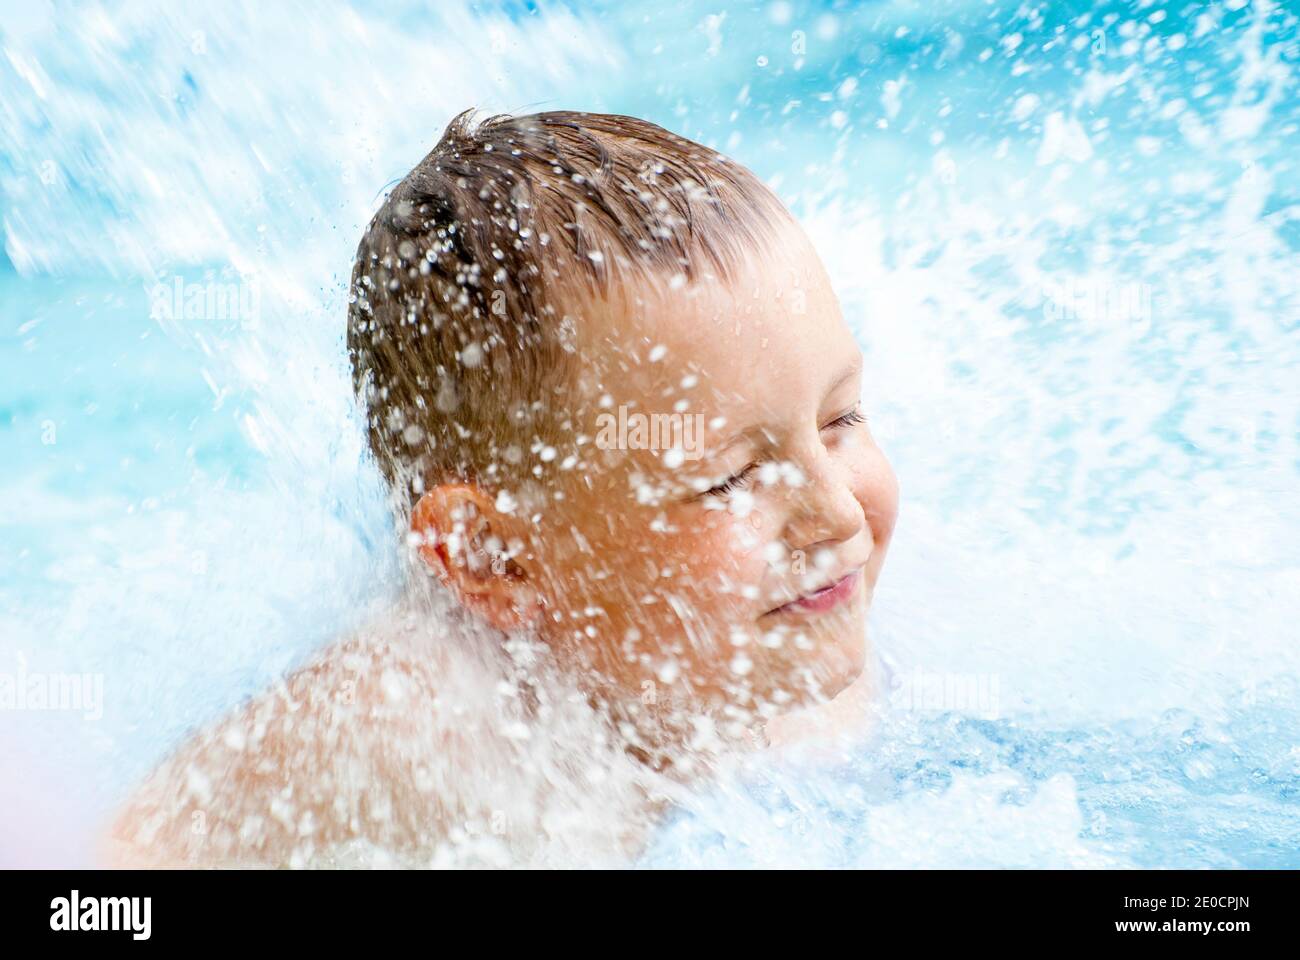 A child boy playing with water in park fountain. Hot summer. Stock Photo